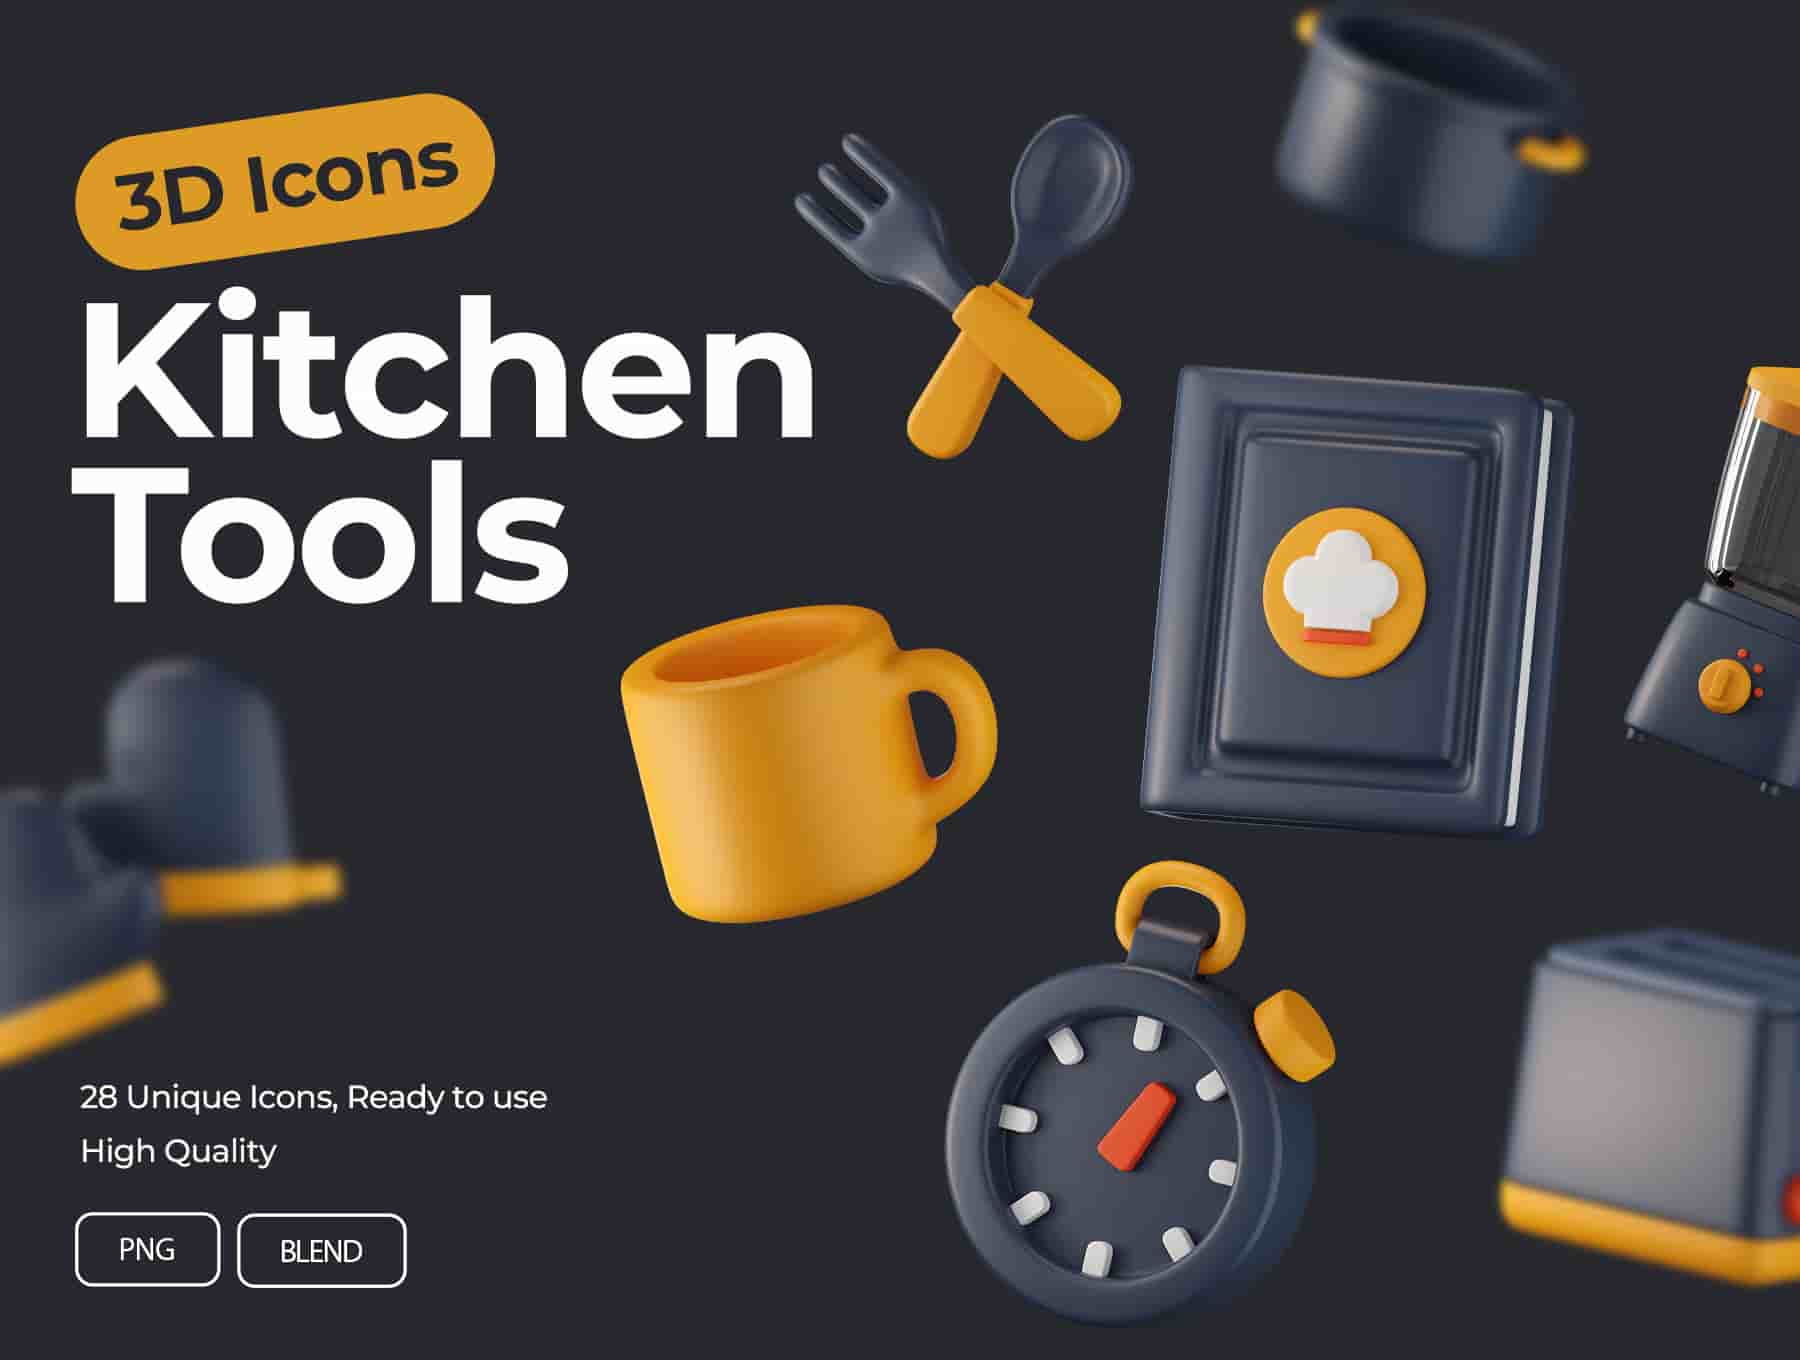 Kitchen Tools 3D Icons